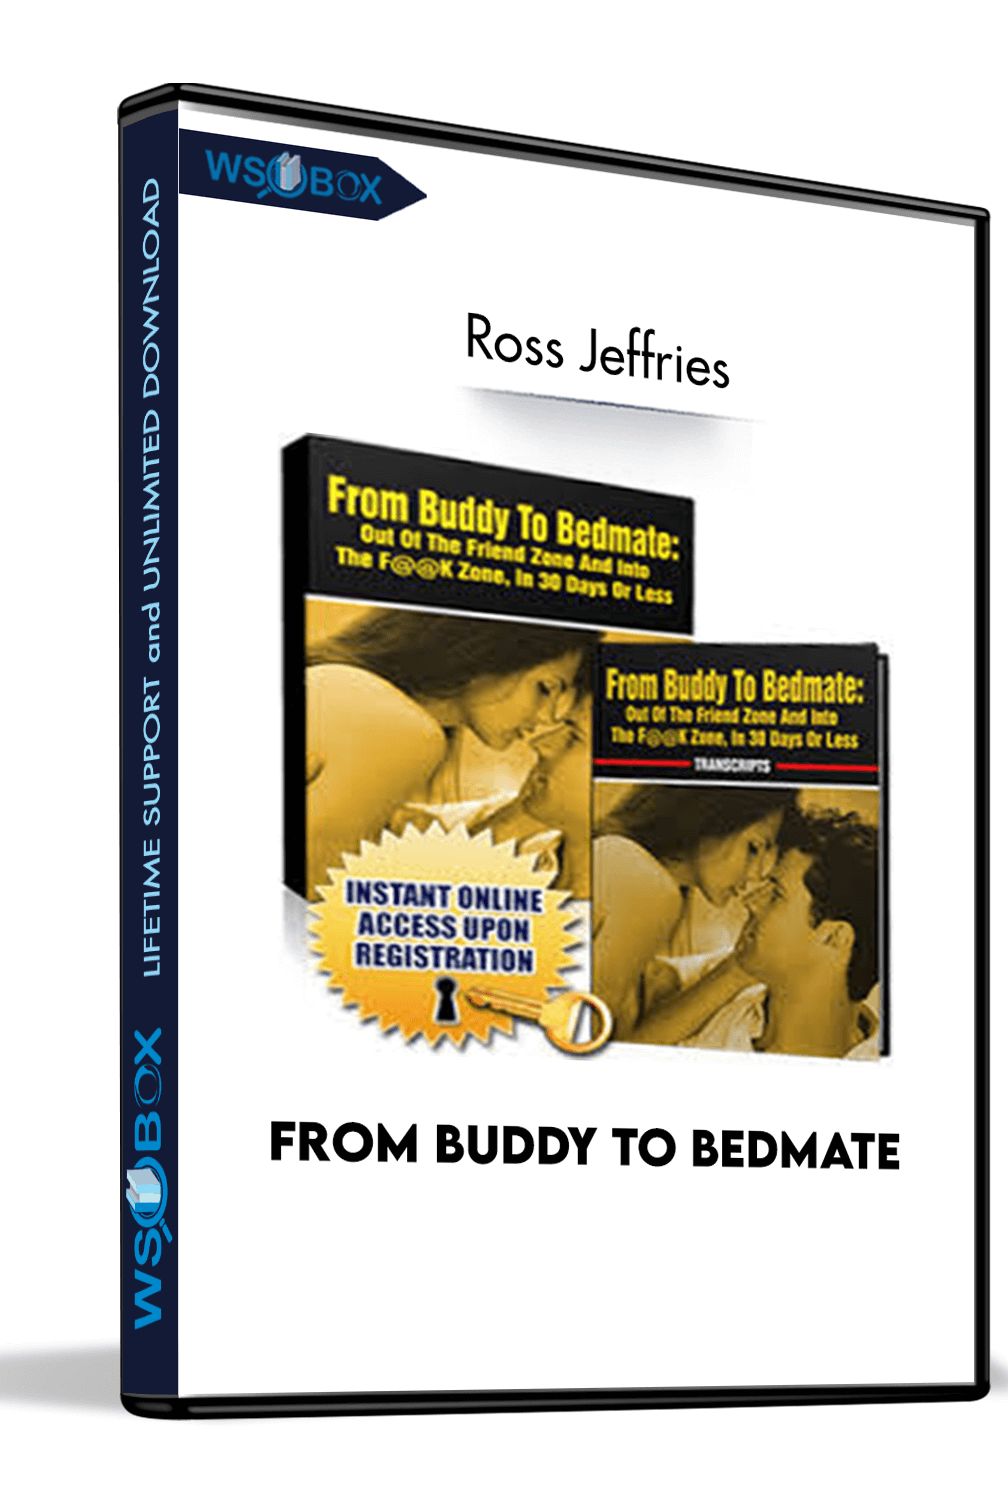 from-buddy-to-bedmate-ross-jeffries